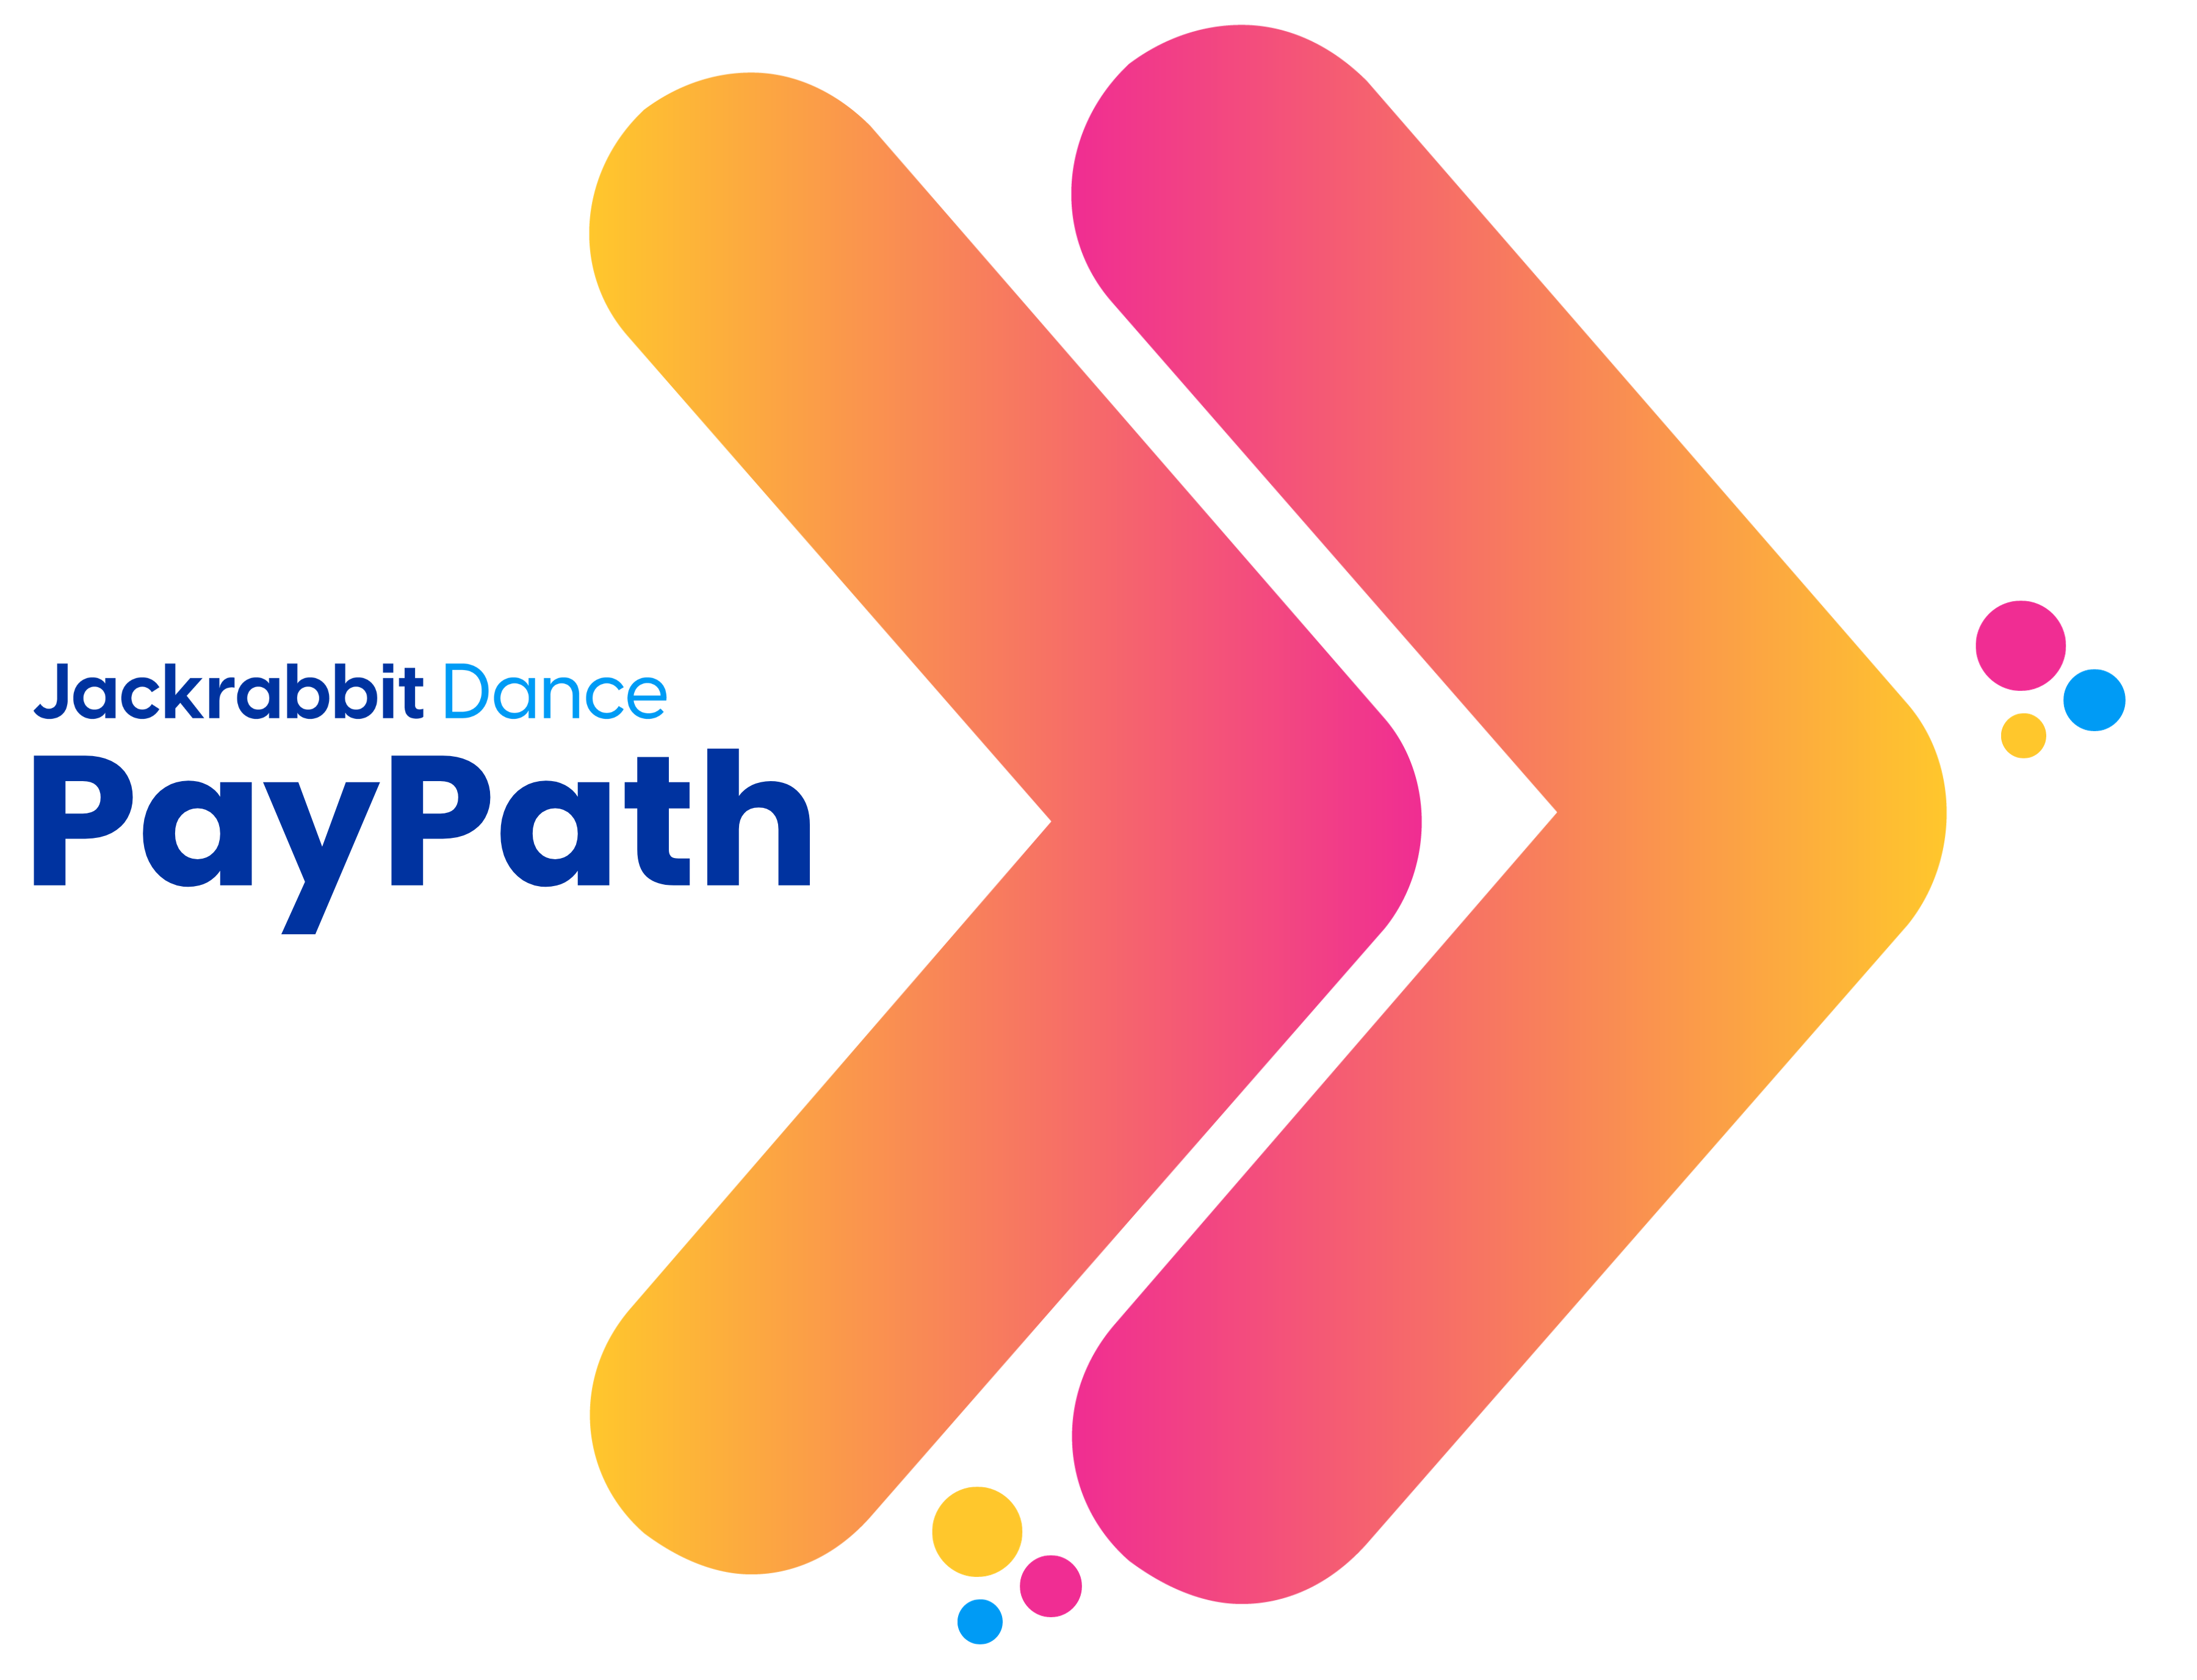 Jackrabbit Dance PayPath logo with pink and yellow arrows